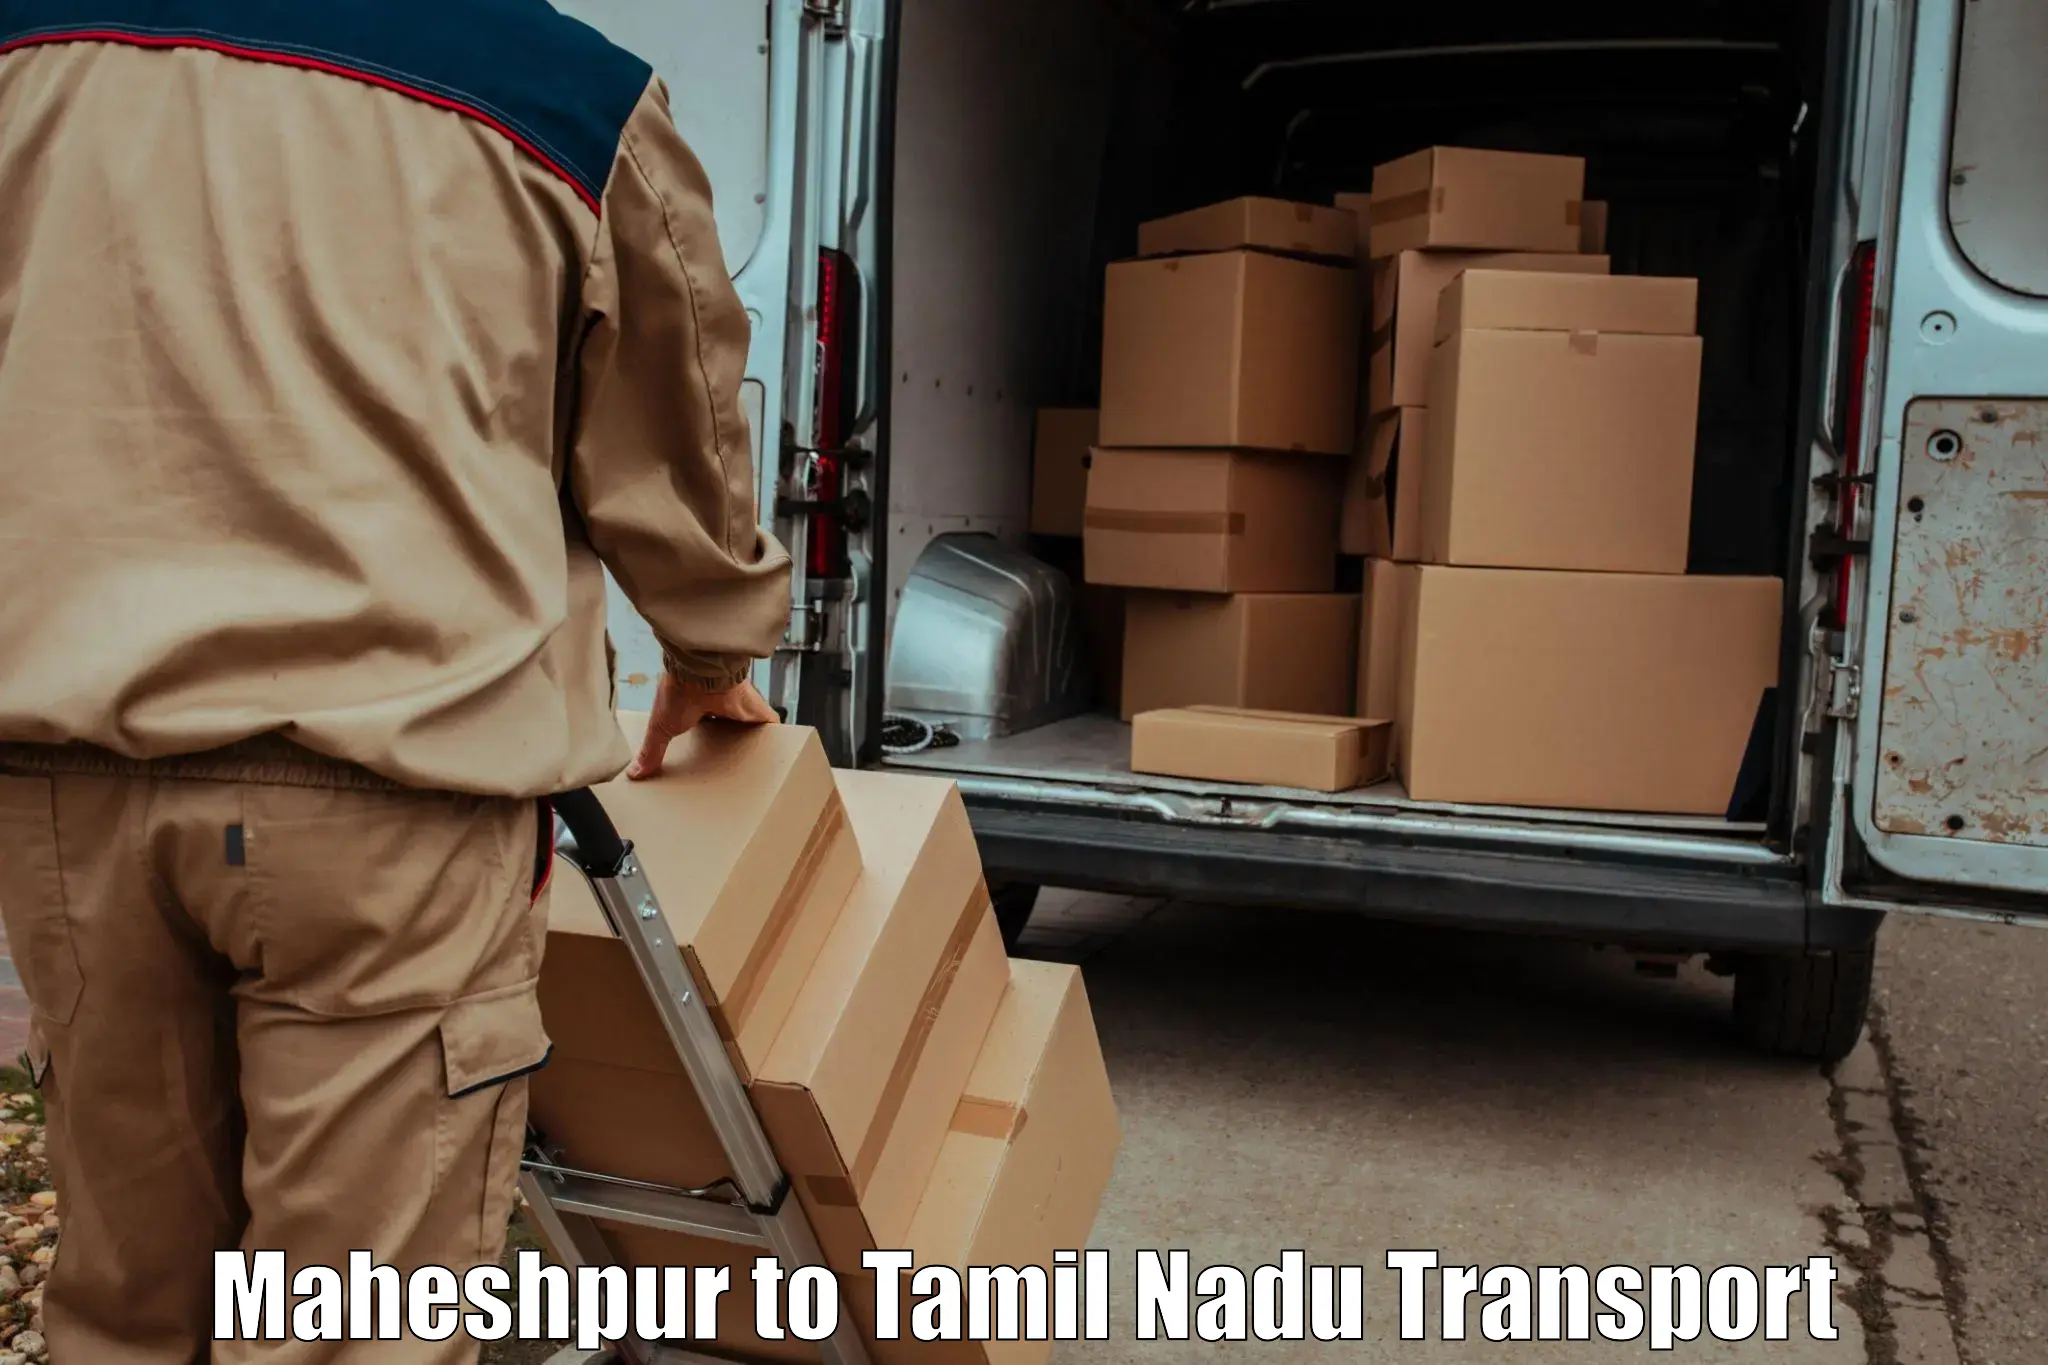 Truck transport companies in India Maheshpur to Trichy